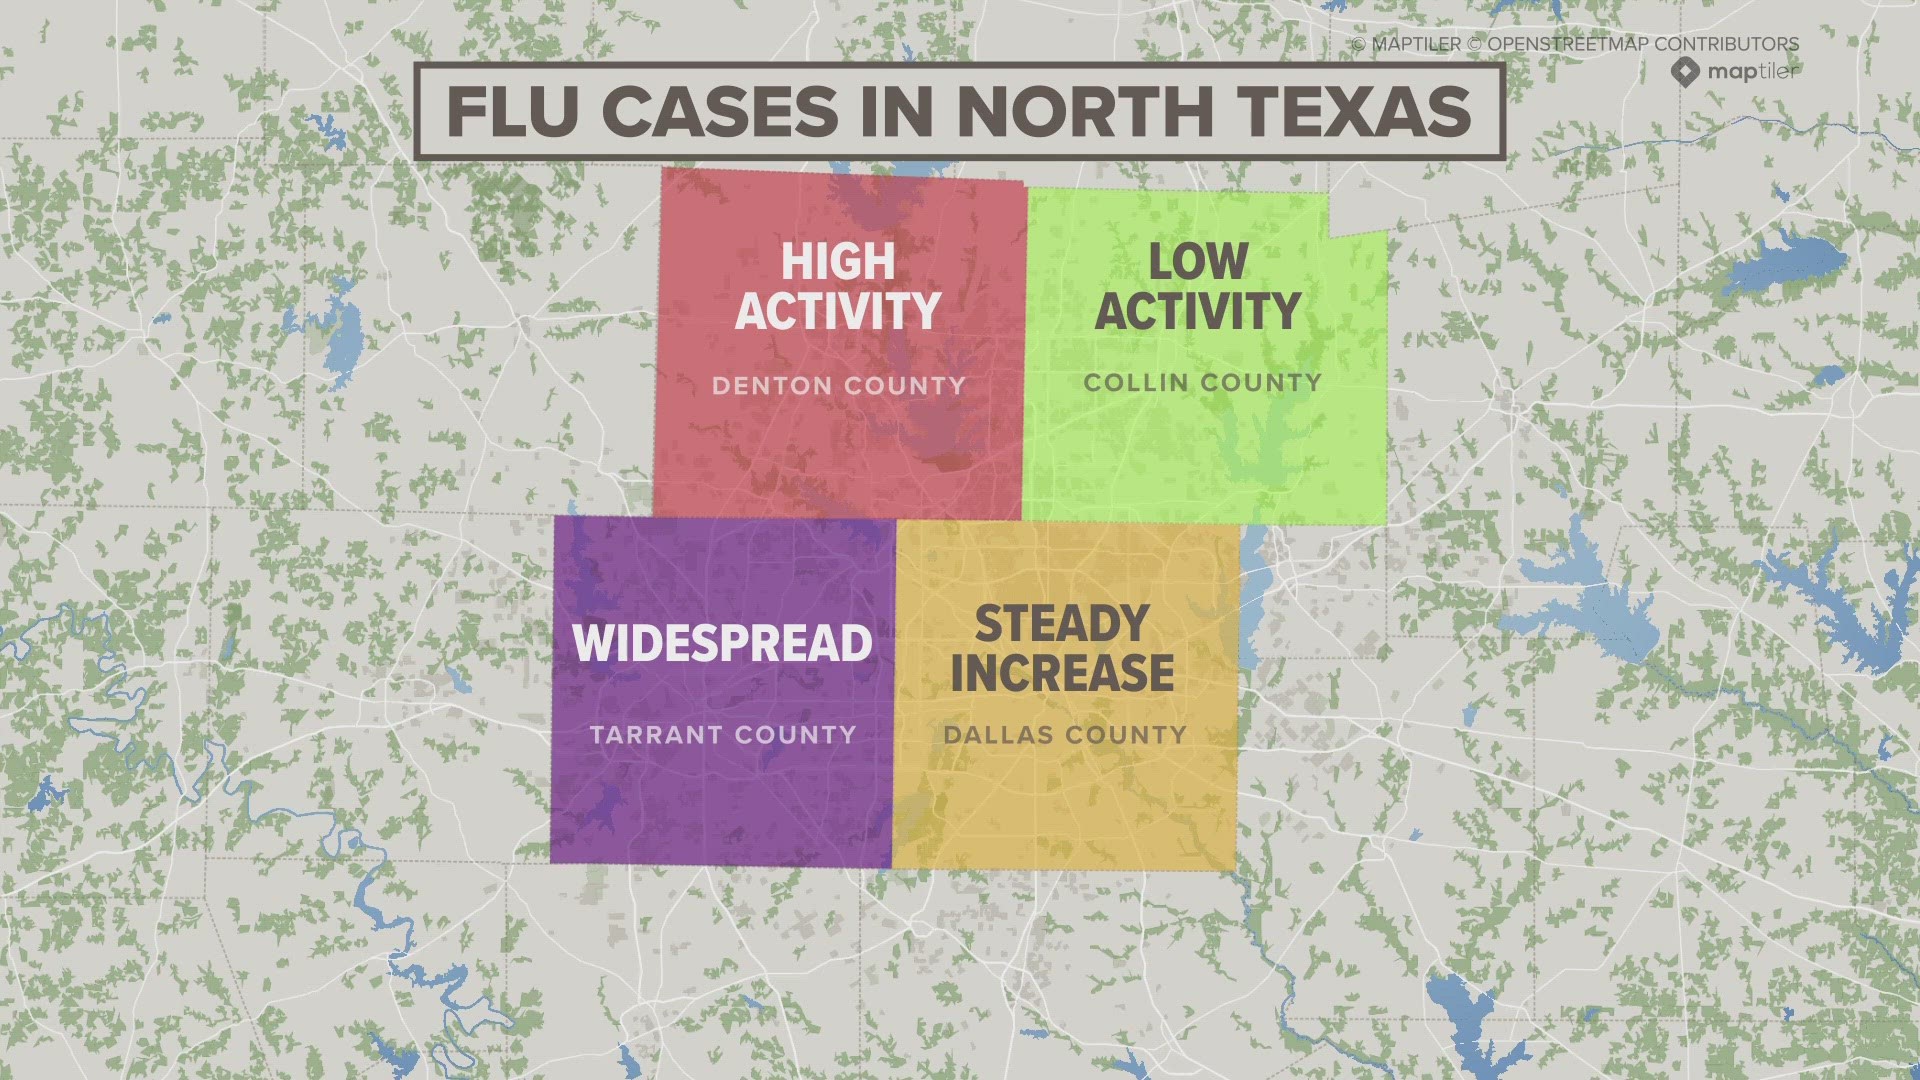 North Texas doctors say the rise in flu activity is largely due to holiday gatherings and indoor events.